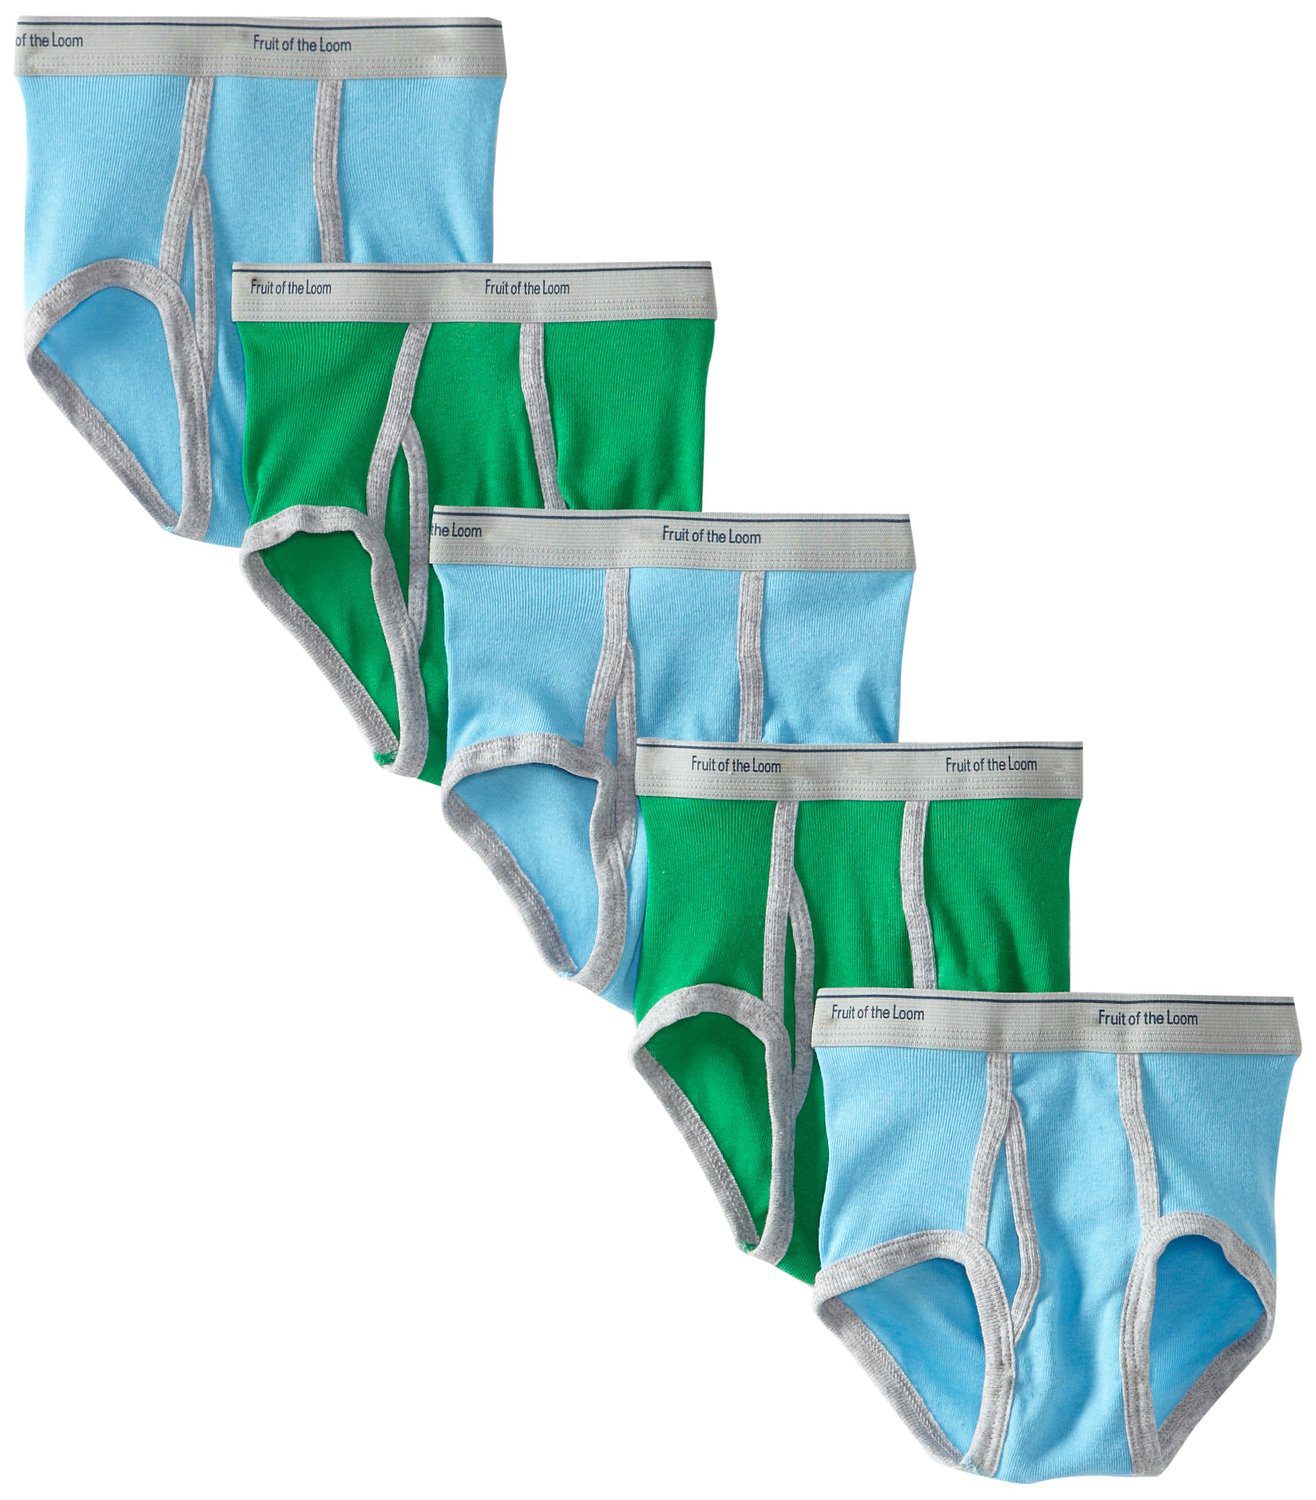 Toddler Boys' Fashion Briefs, Assorted 5 Pack